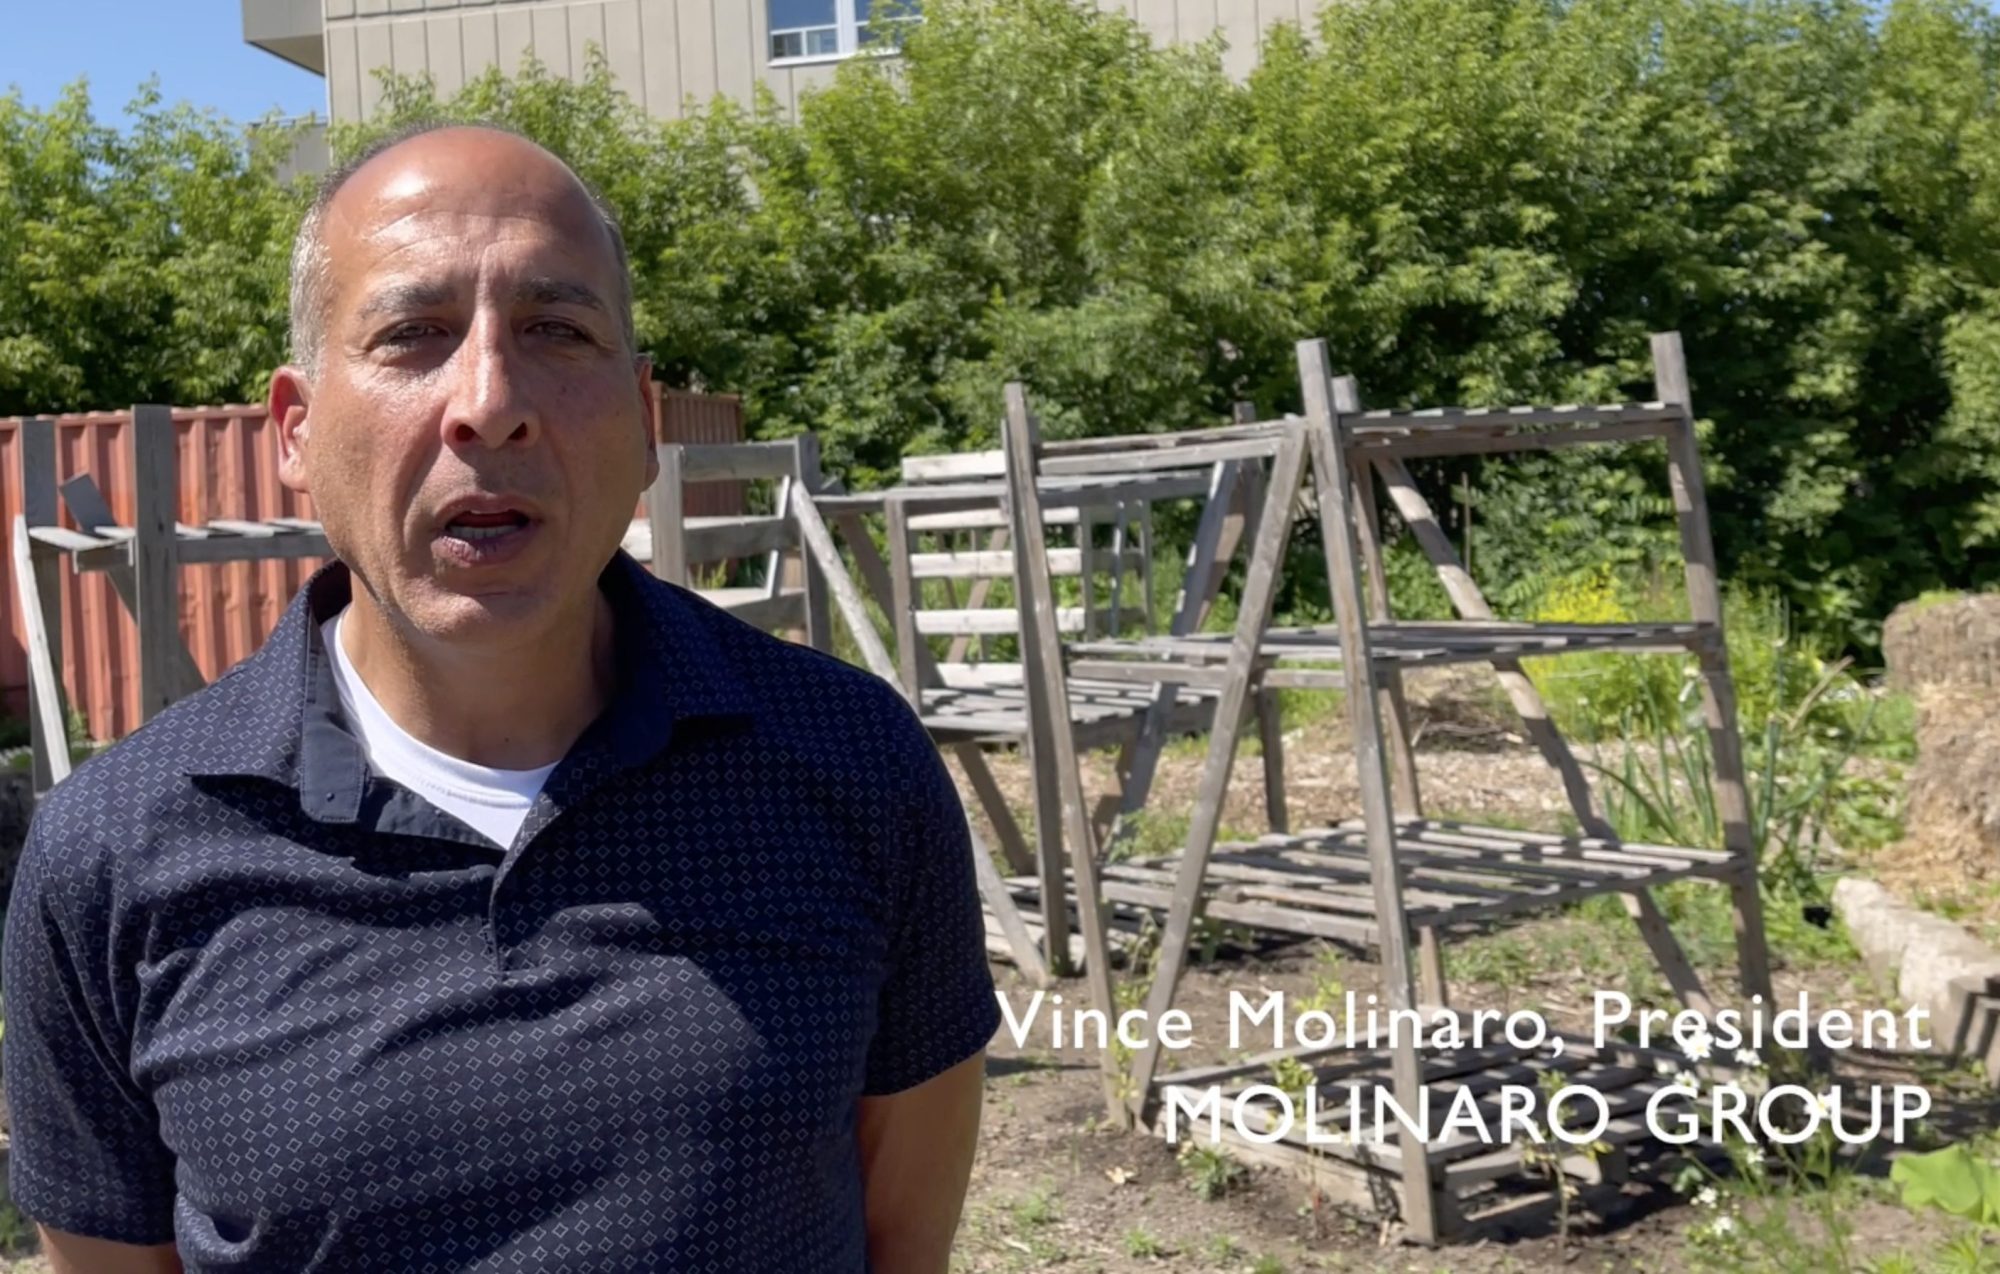 Vince Molinaro at the Bunchberry Connections Urban Farm, 2022